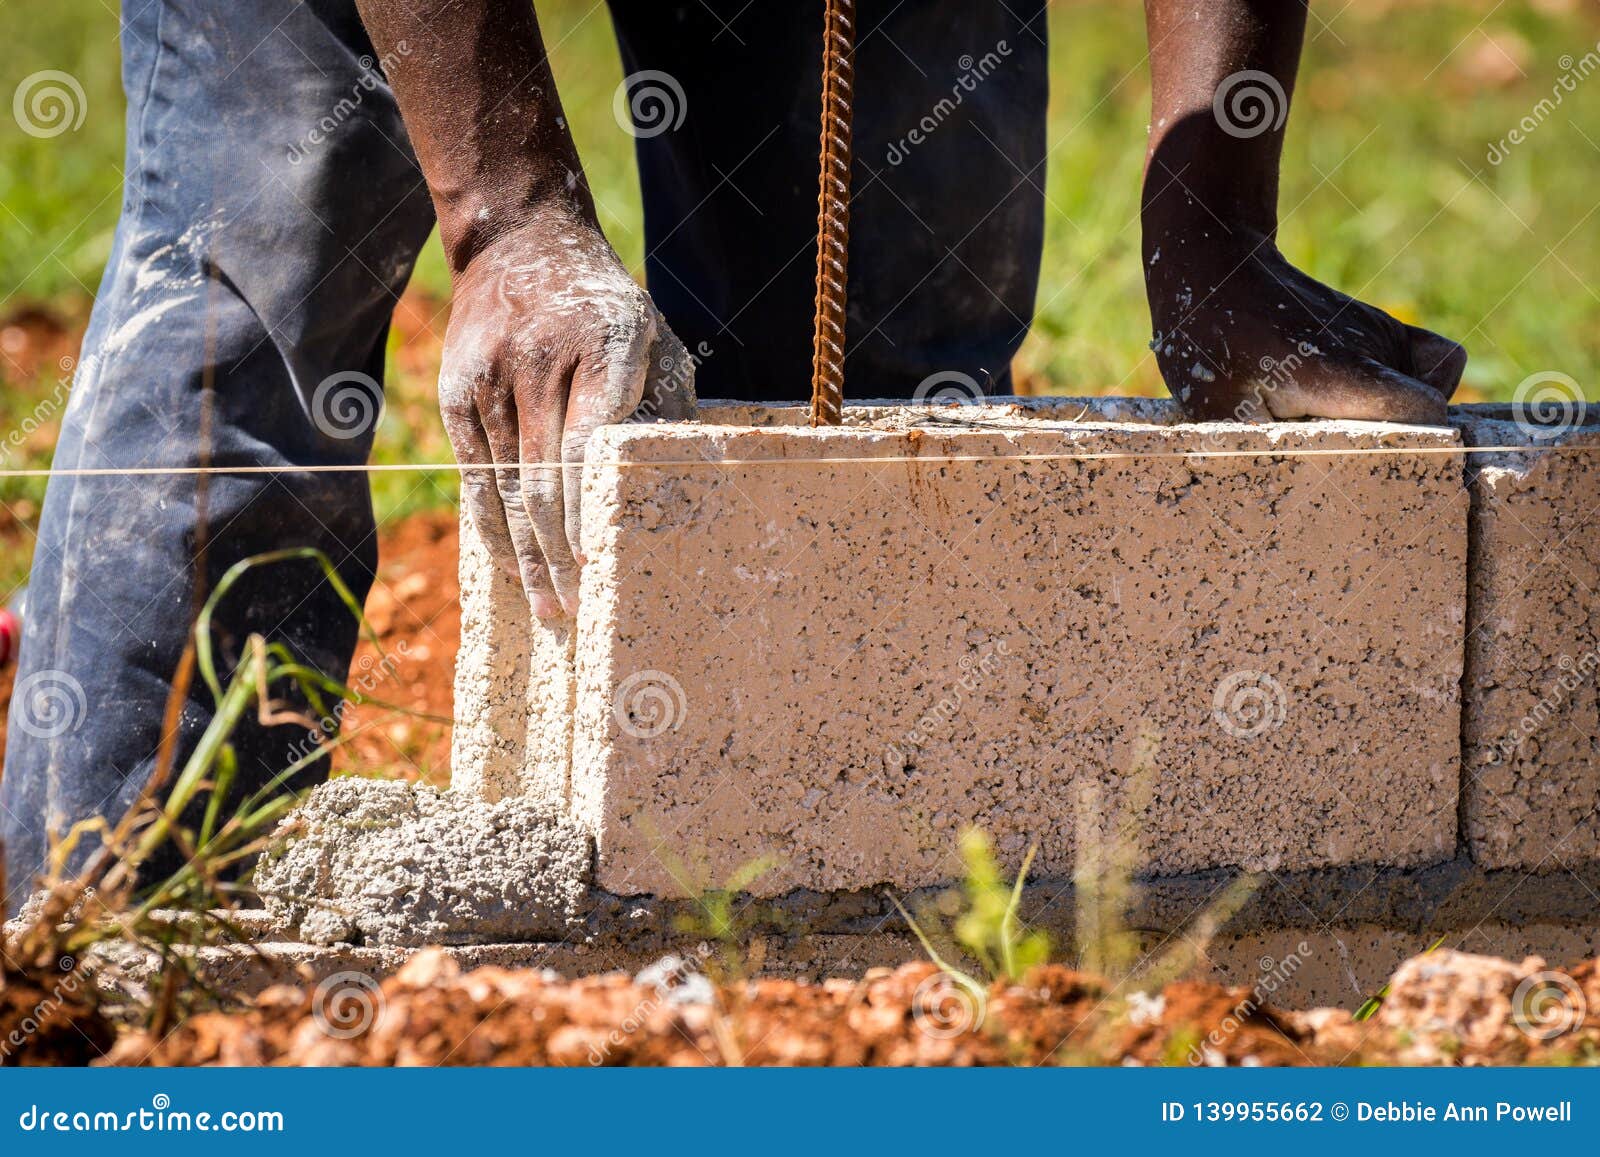 Construction Worker/bricklayer/mason Laying Concrete Block on Wet